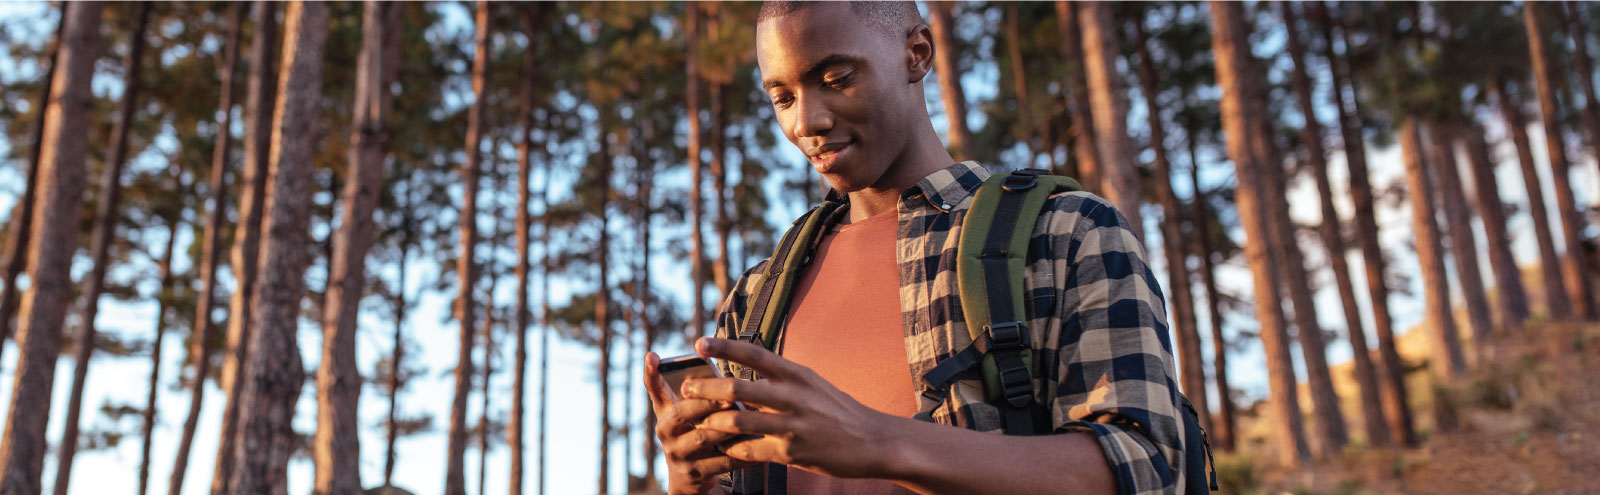 Man looking at phone while hiking in forest